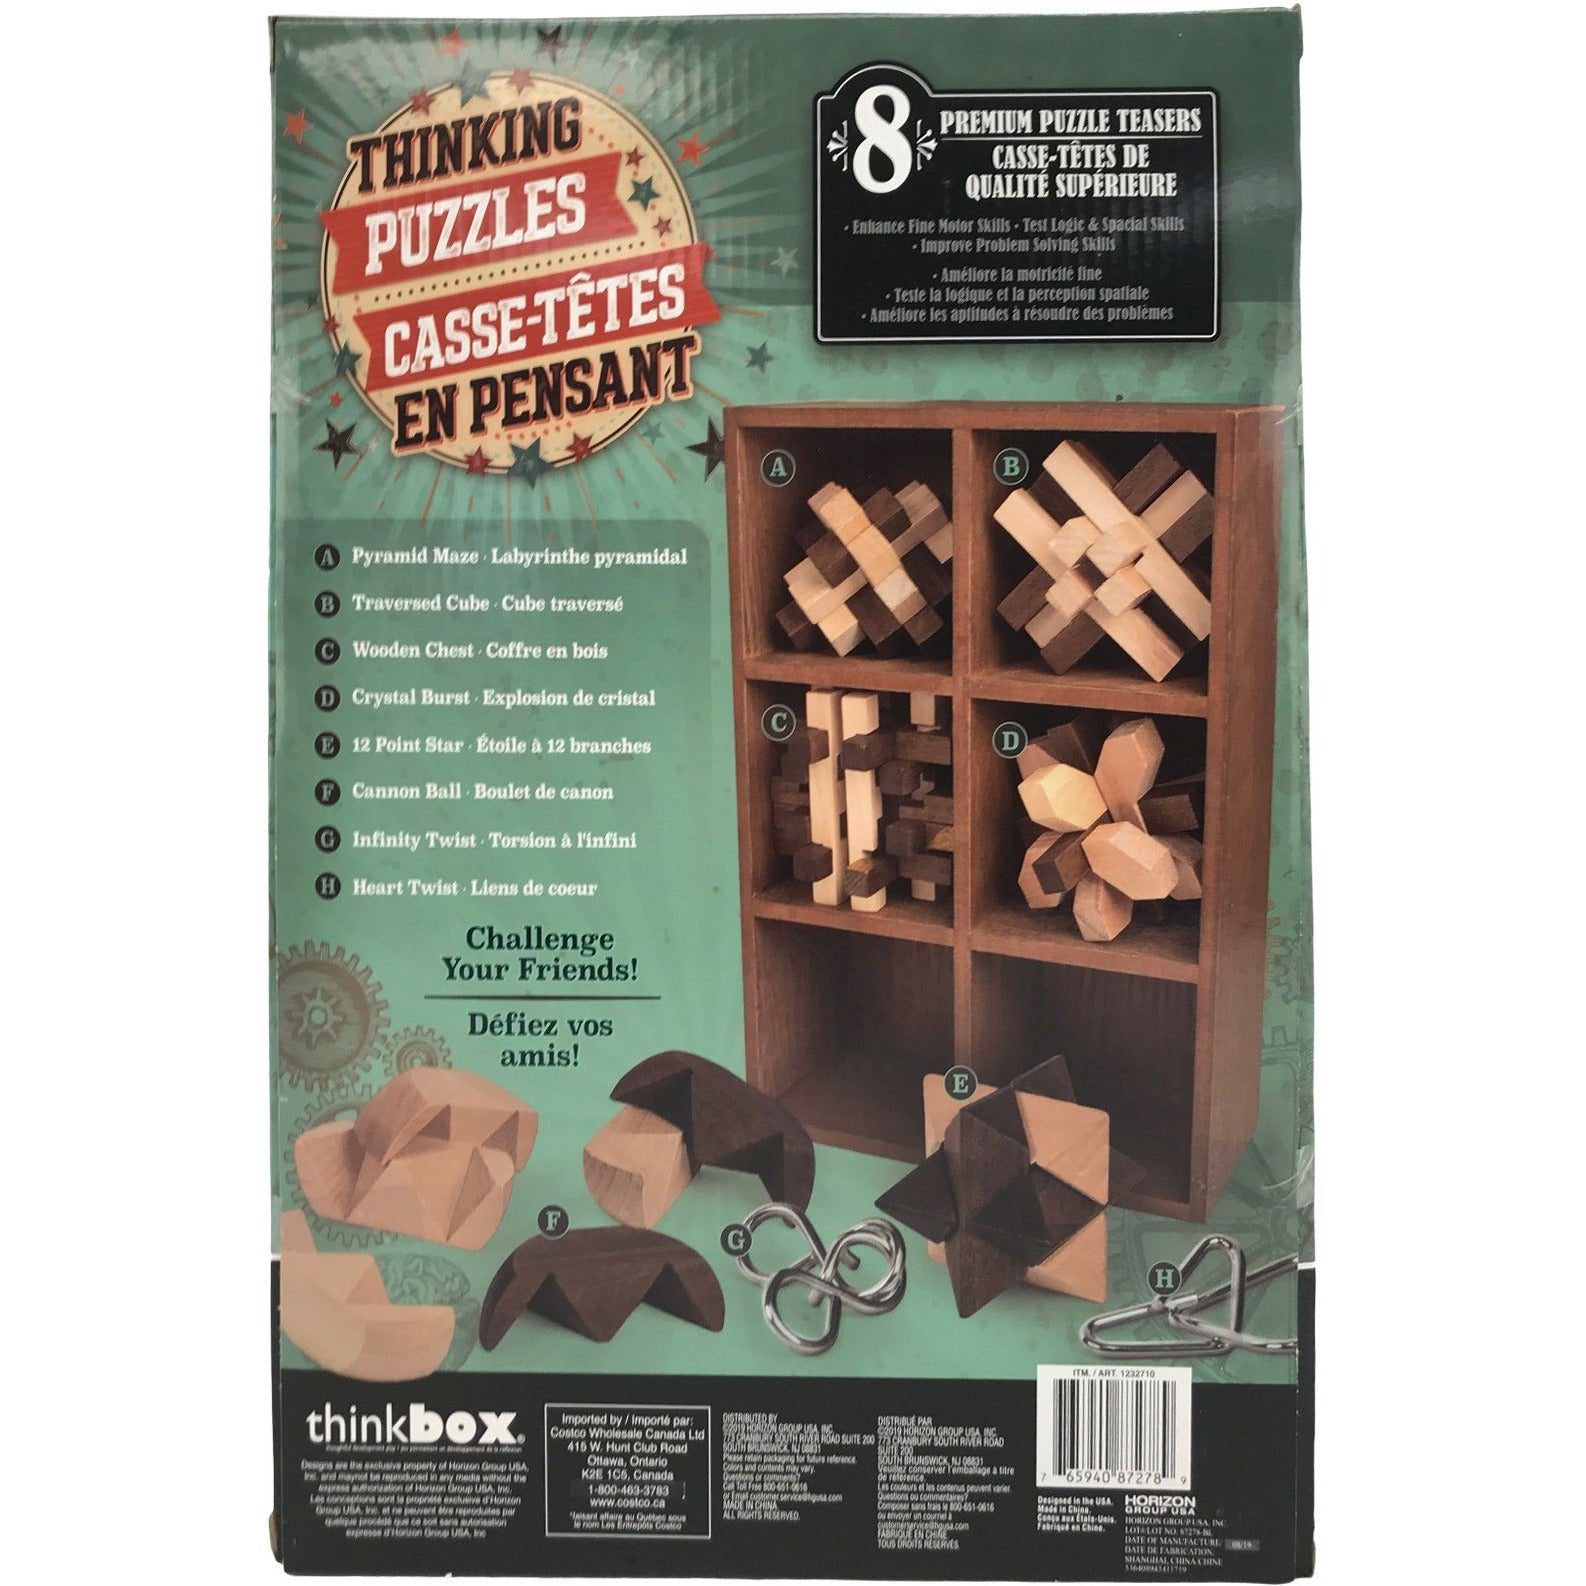 Thinkbox Thinking Puzzles 8 premium brain teaseing puzzles made of 100% Wood